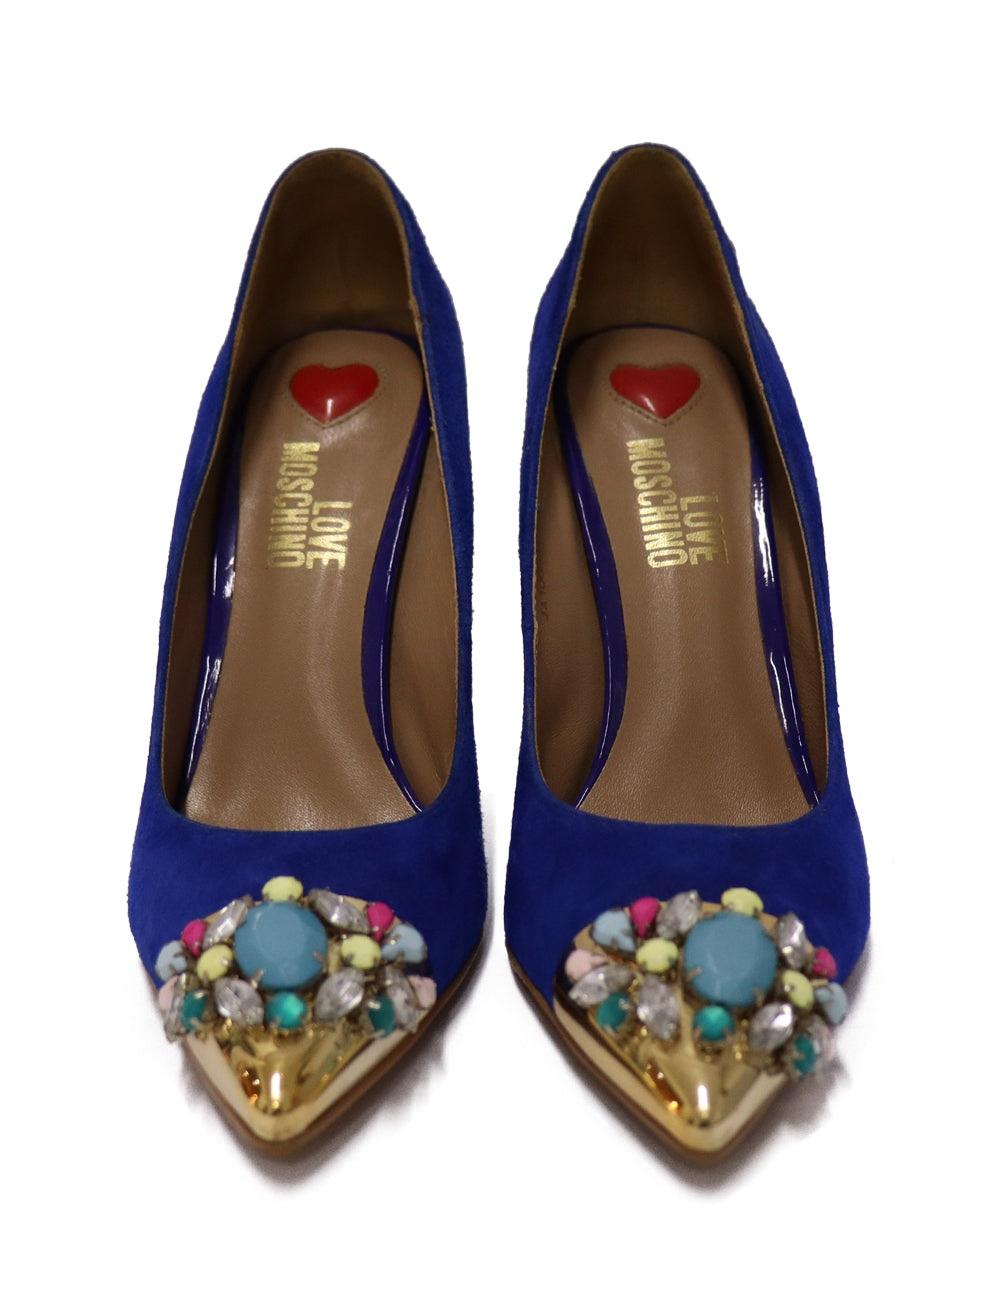 Love Moschino blue suede pumps with a metal gold toe and a multi-colored rhinestone embellishments.

Additional information:
Material: Suede
Size: EU 38
Measurements: Heel: 10 cm 
Overall condition: Good
Interior Condition: Signs of use
Exterior